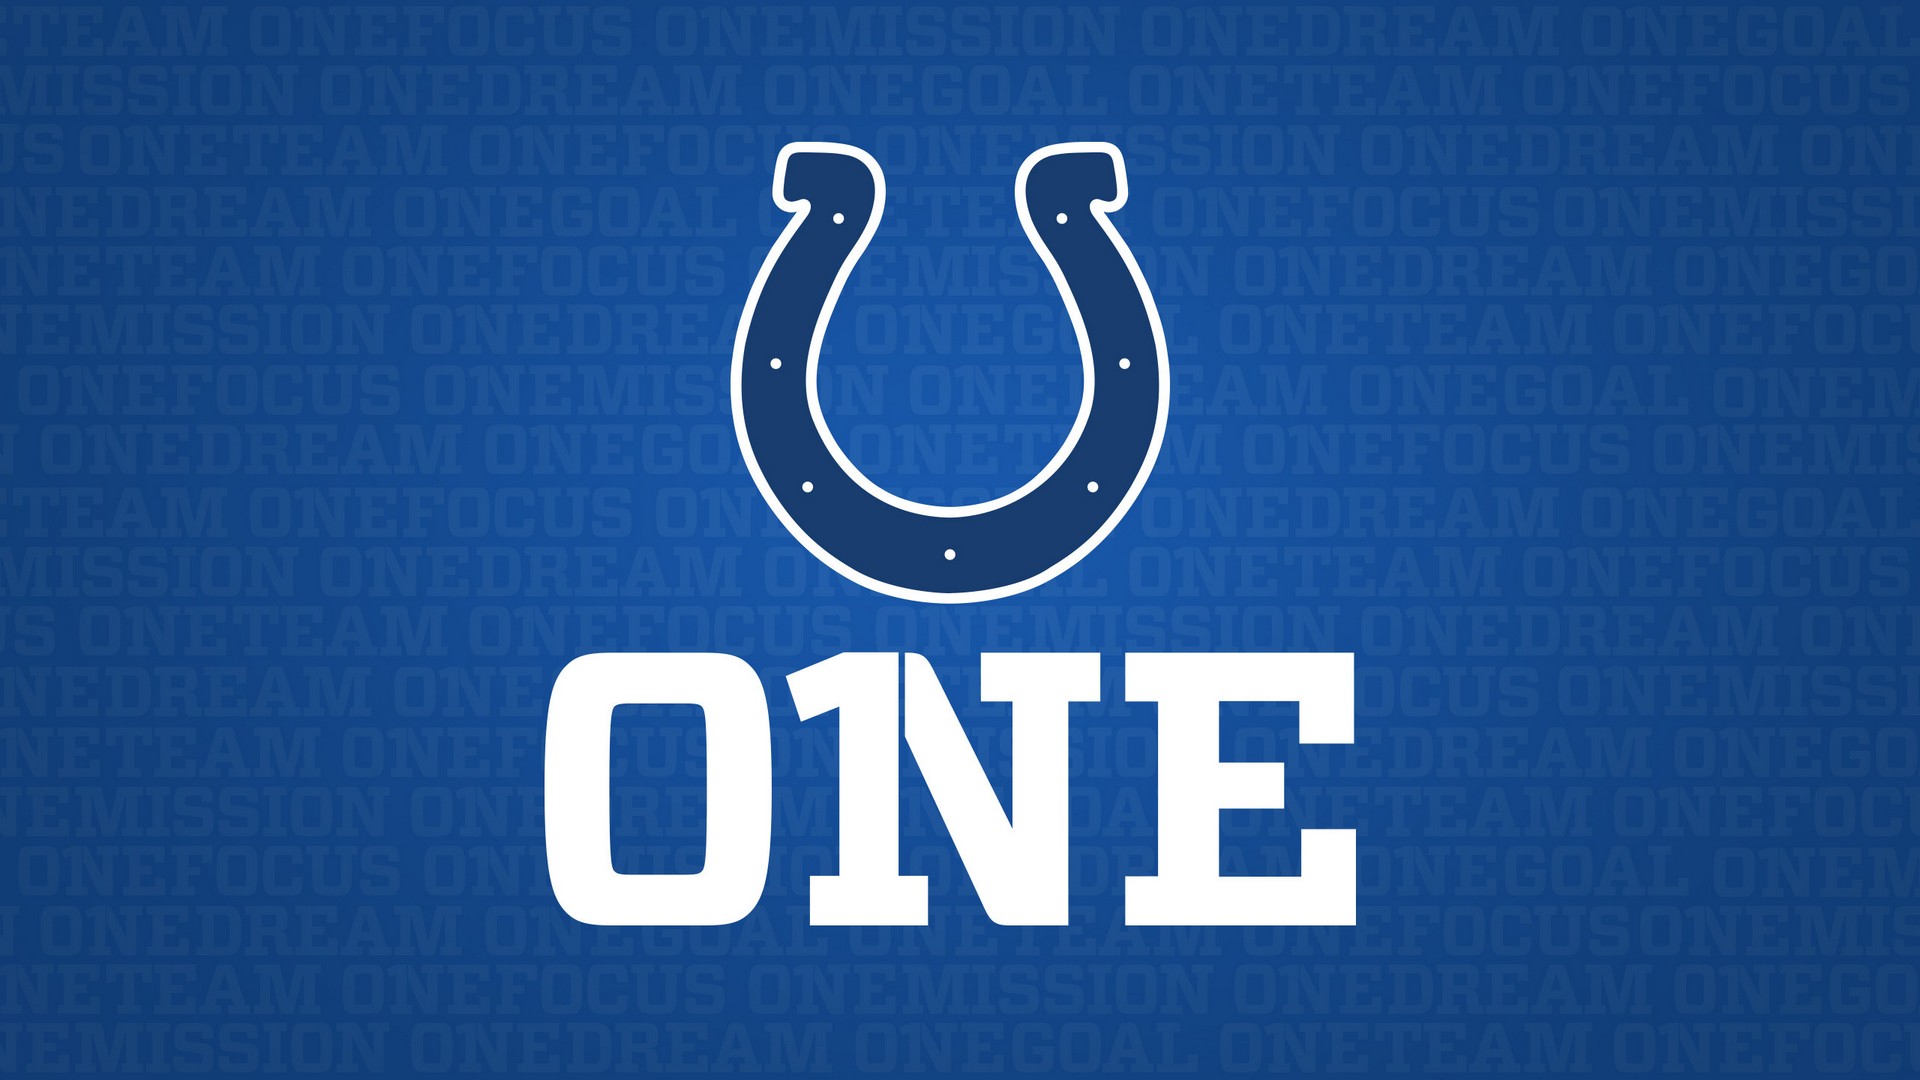 Indianapolis Colts Desktop Wallpapers 1920x1080